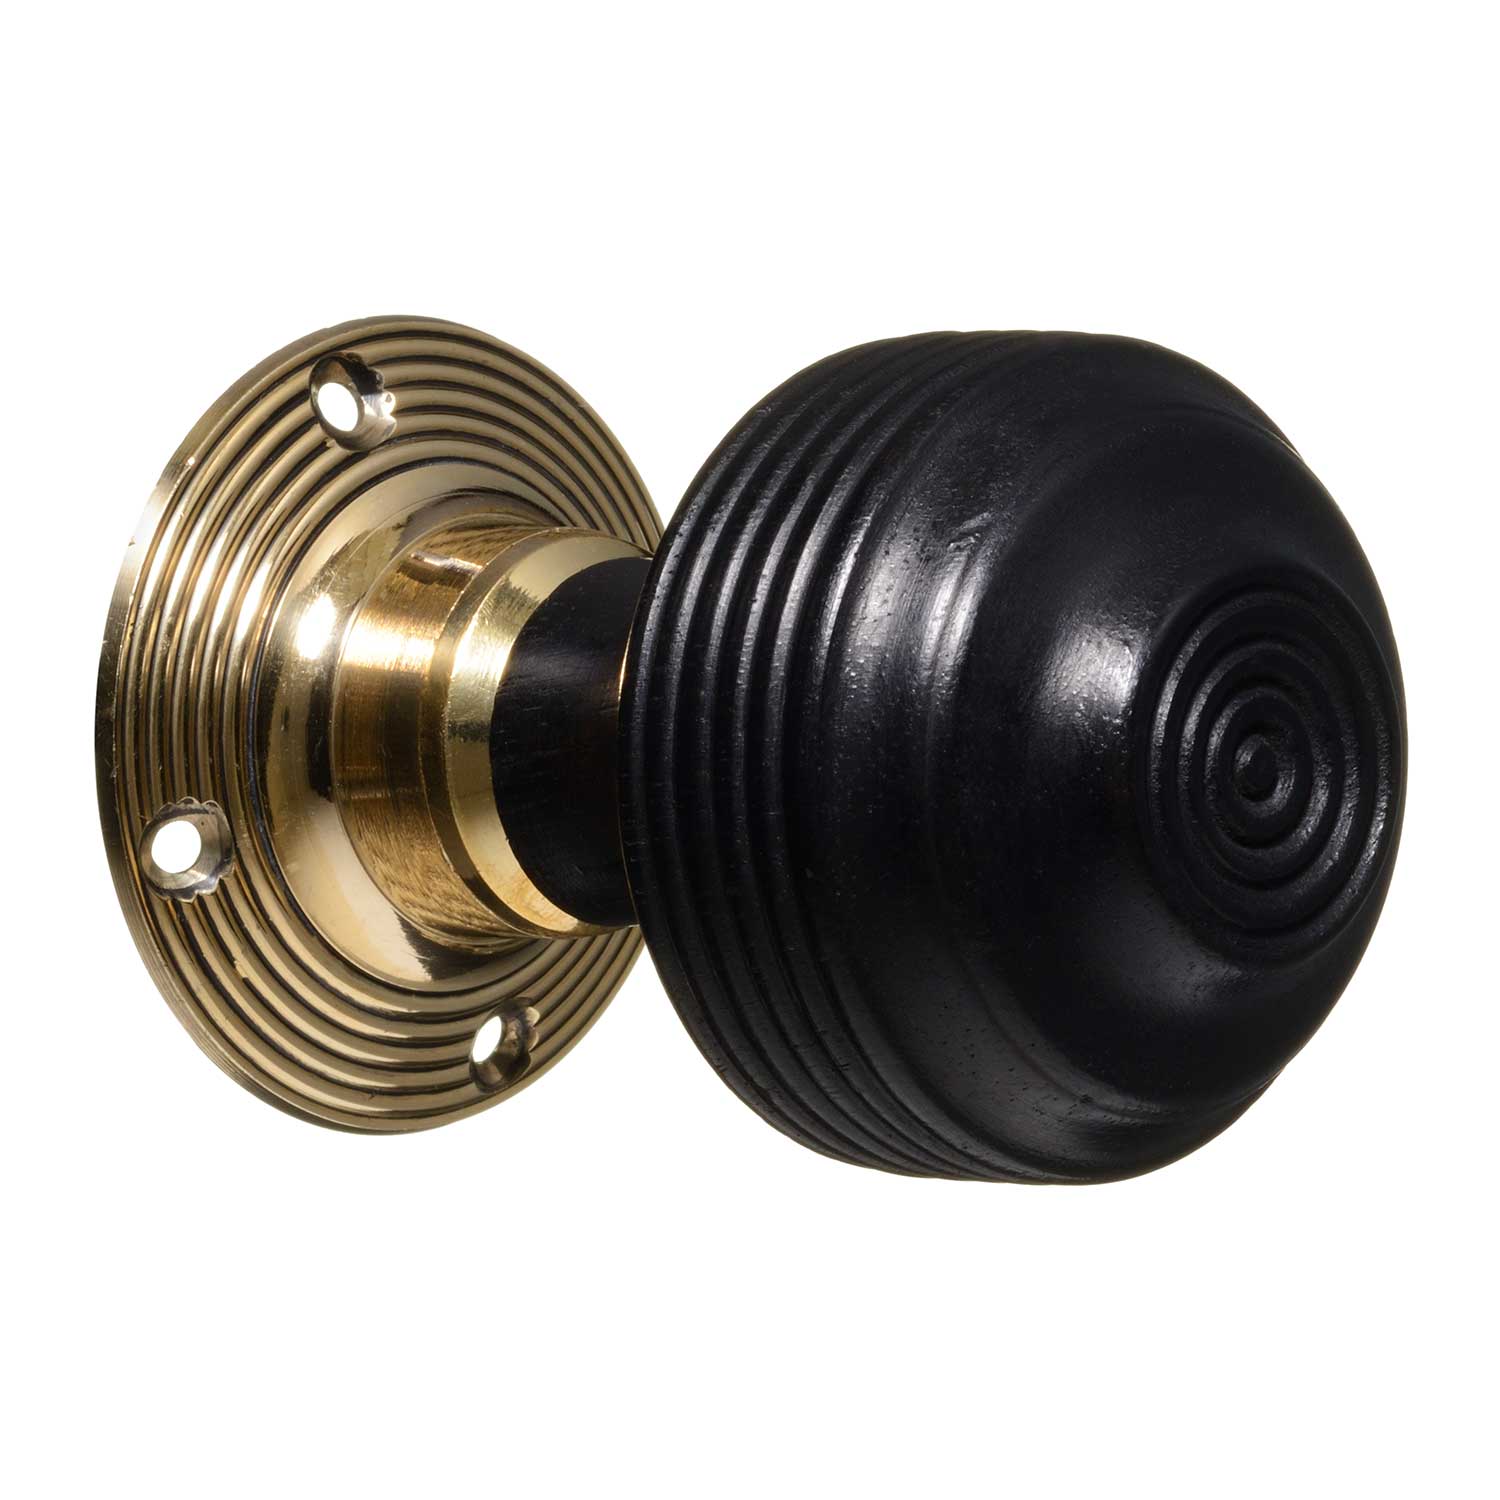 Pair of Solid Brass Oval Mortice Artisan Brass Door Knob 65mm With